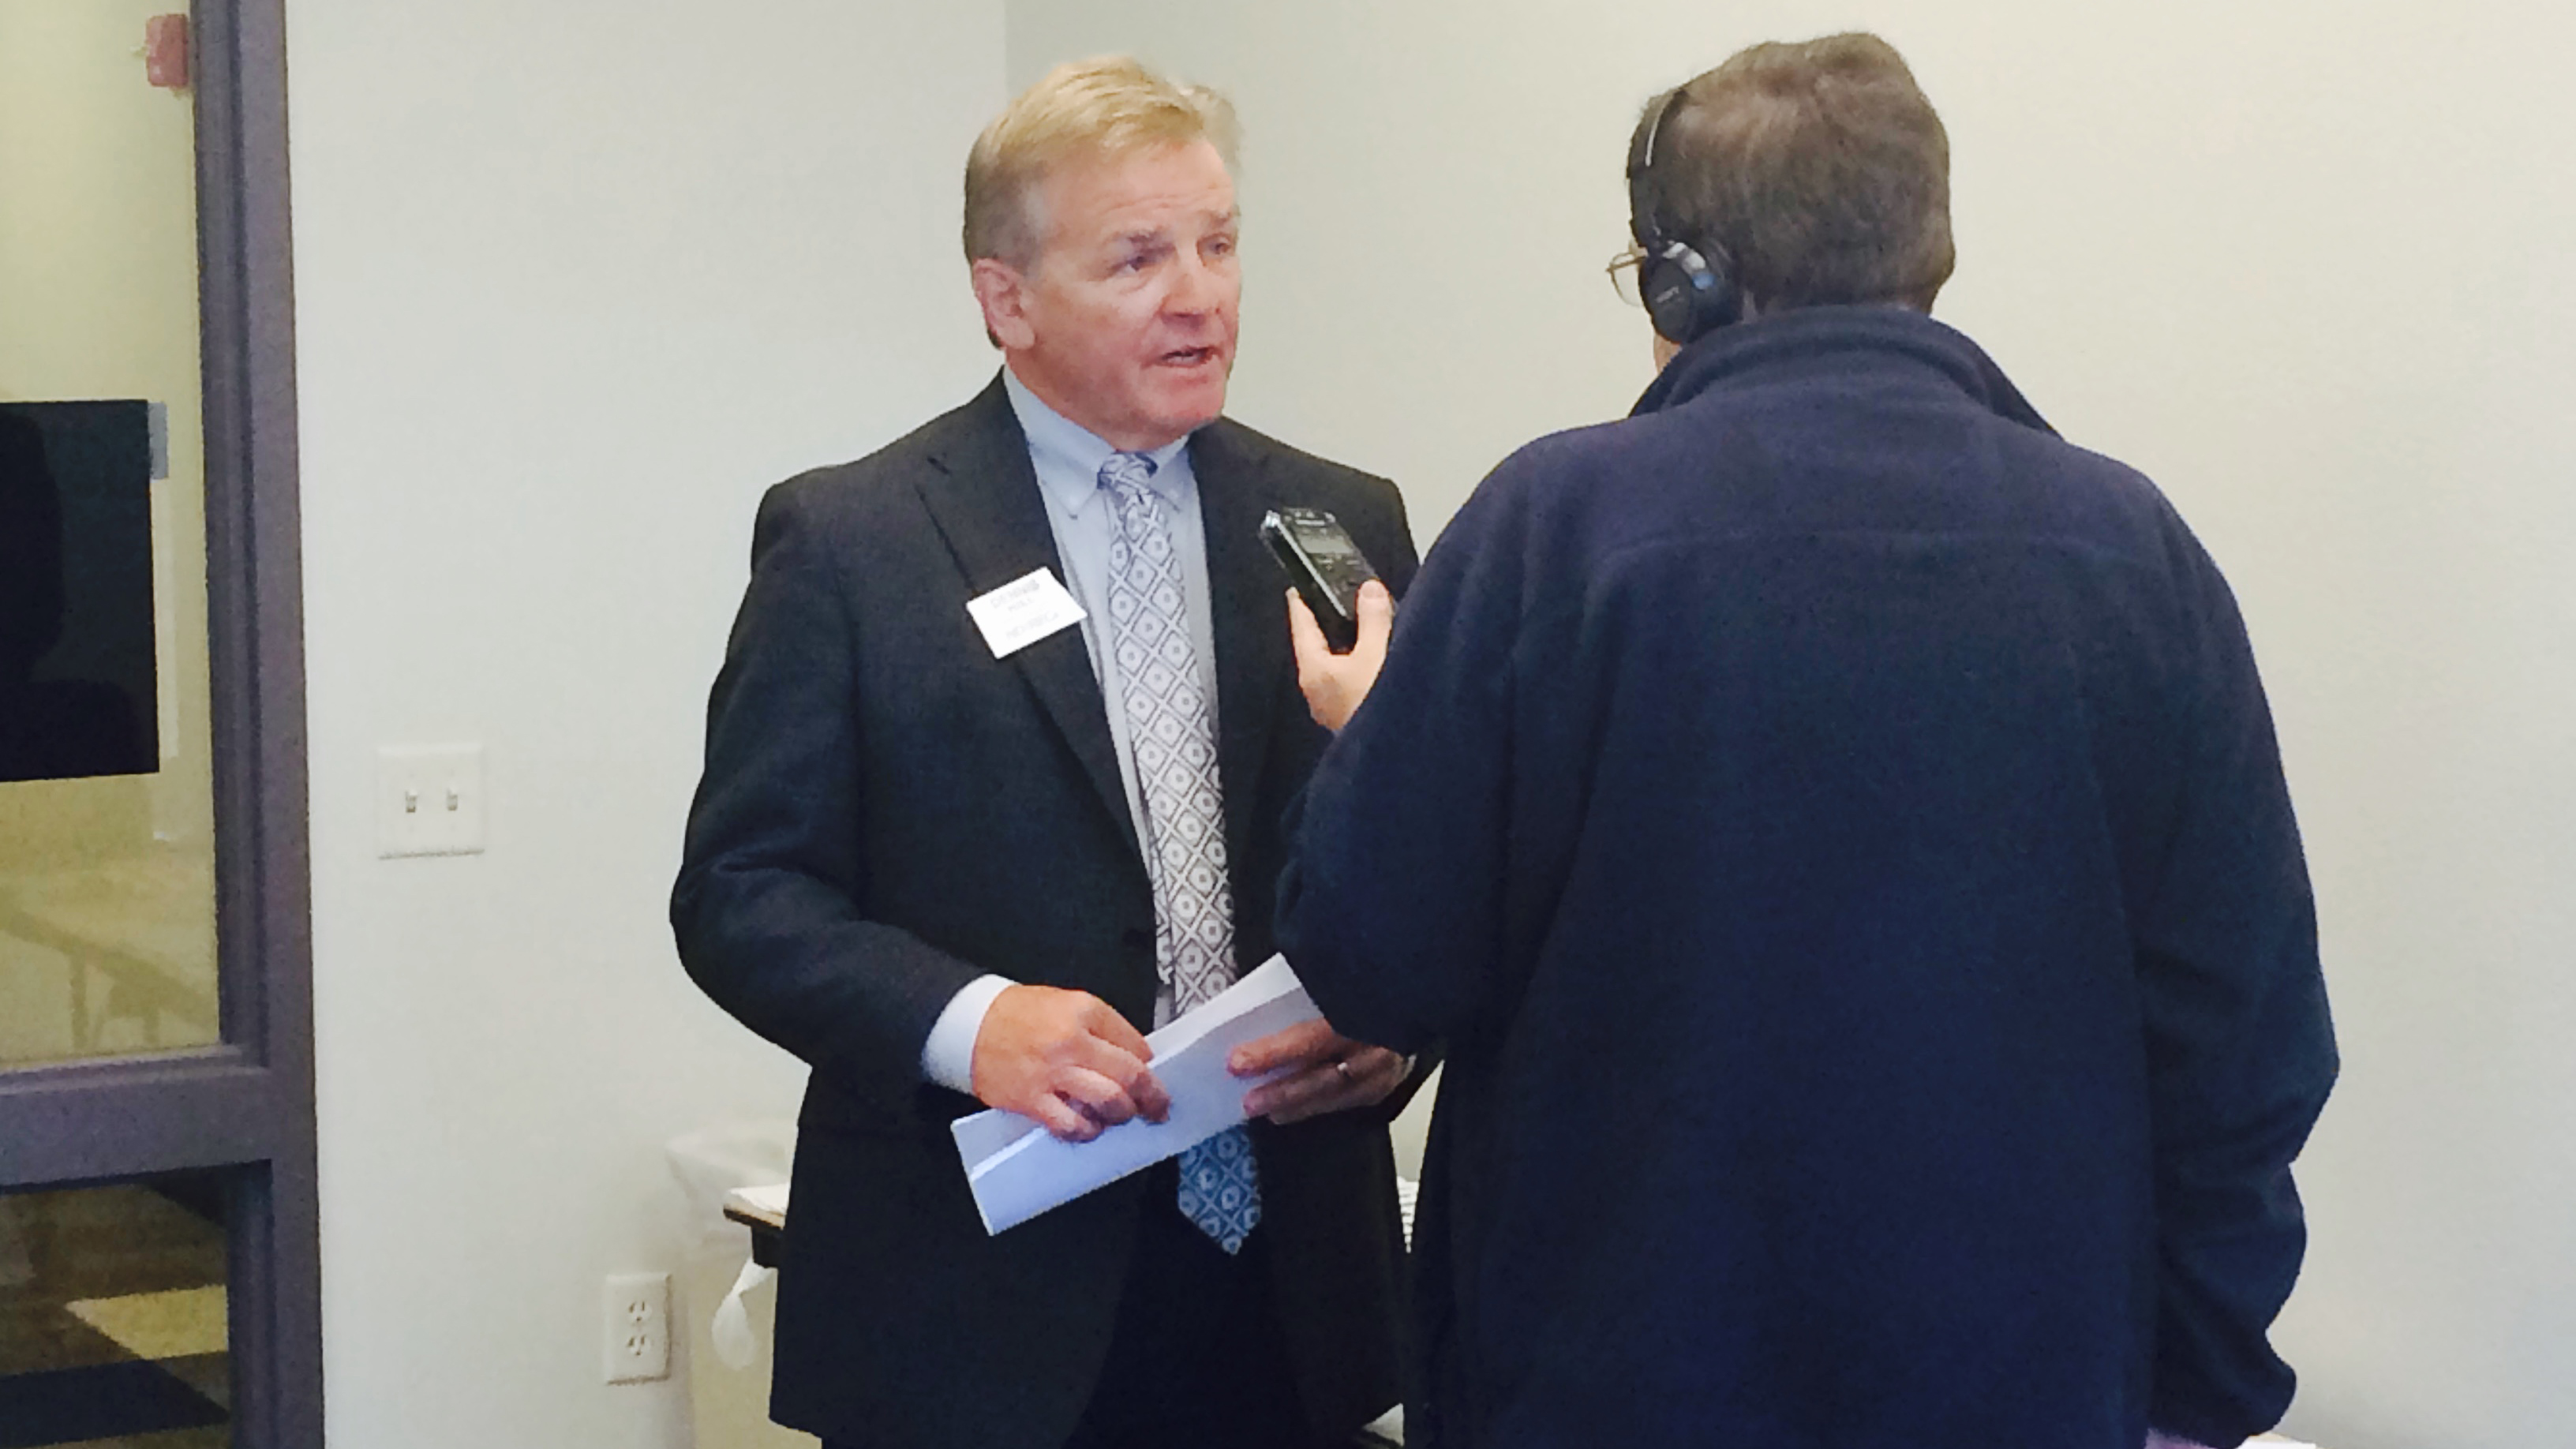 Dennis Hill, executive vice president and general manager of the North Dakota Association of Rural Electric Cooperatives, is interviewed by North Dakota Public Radio before a discussion of Pew’s Clean Economy Rising research (Oct. 22, 2014).